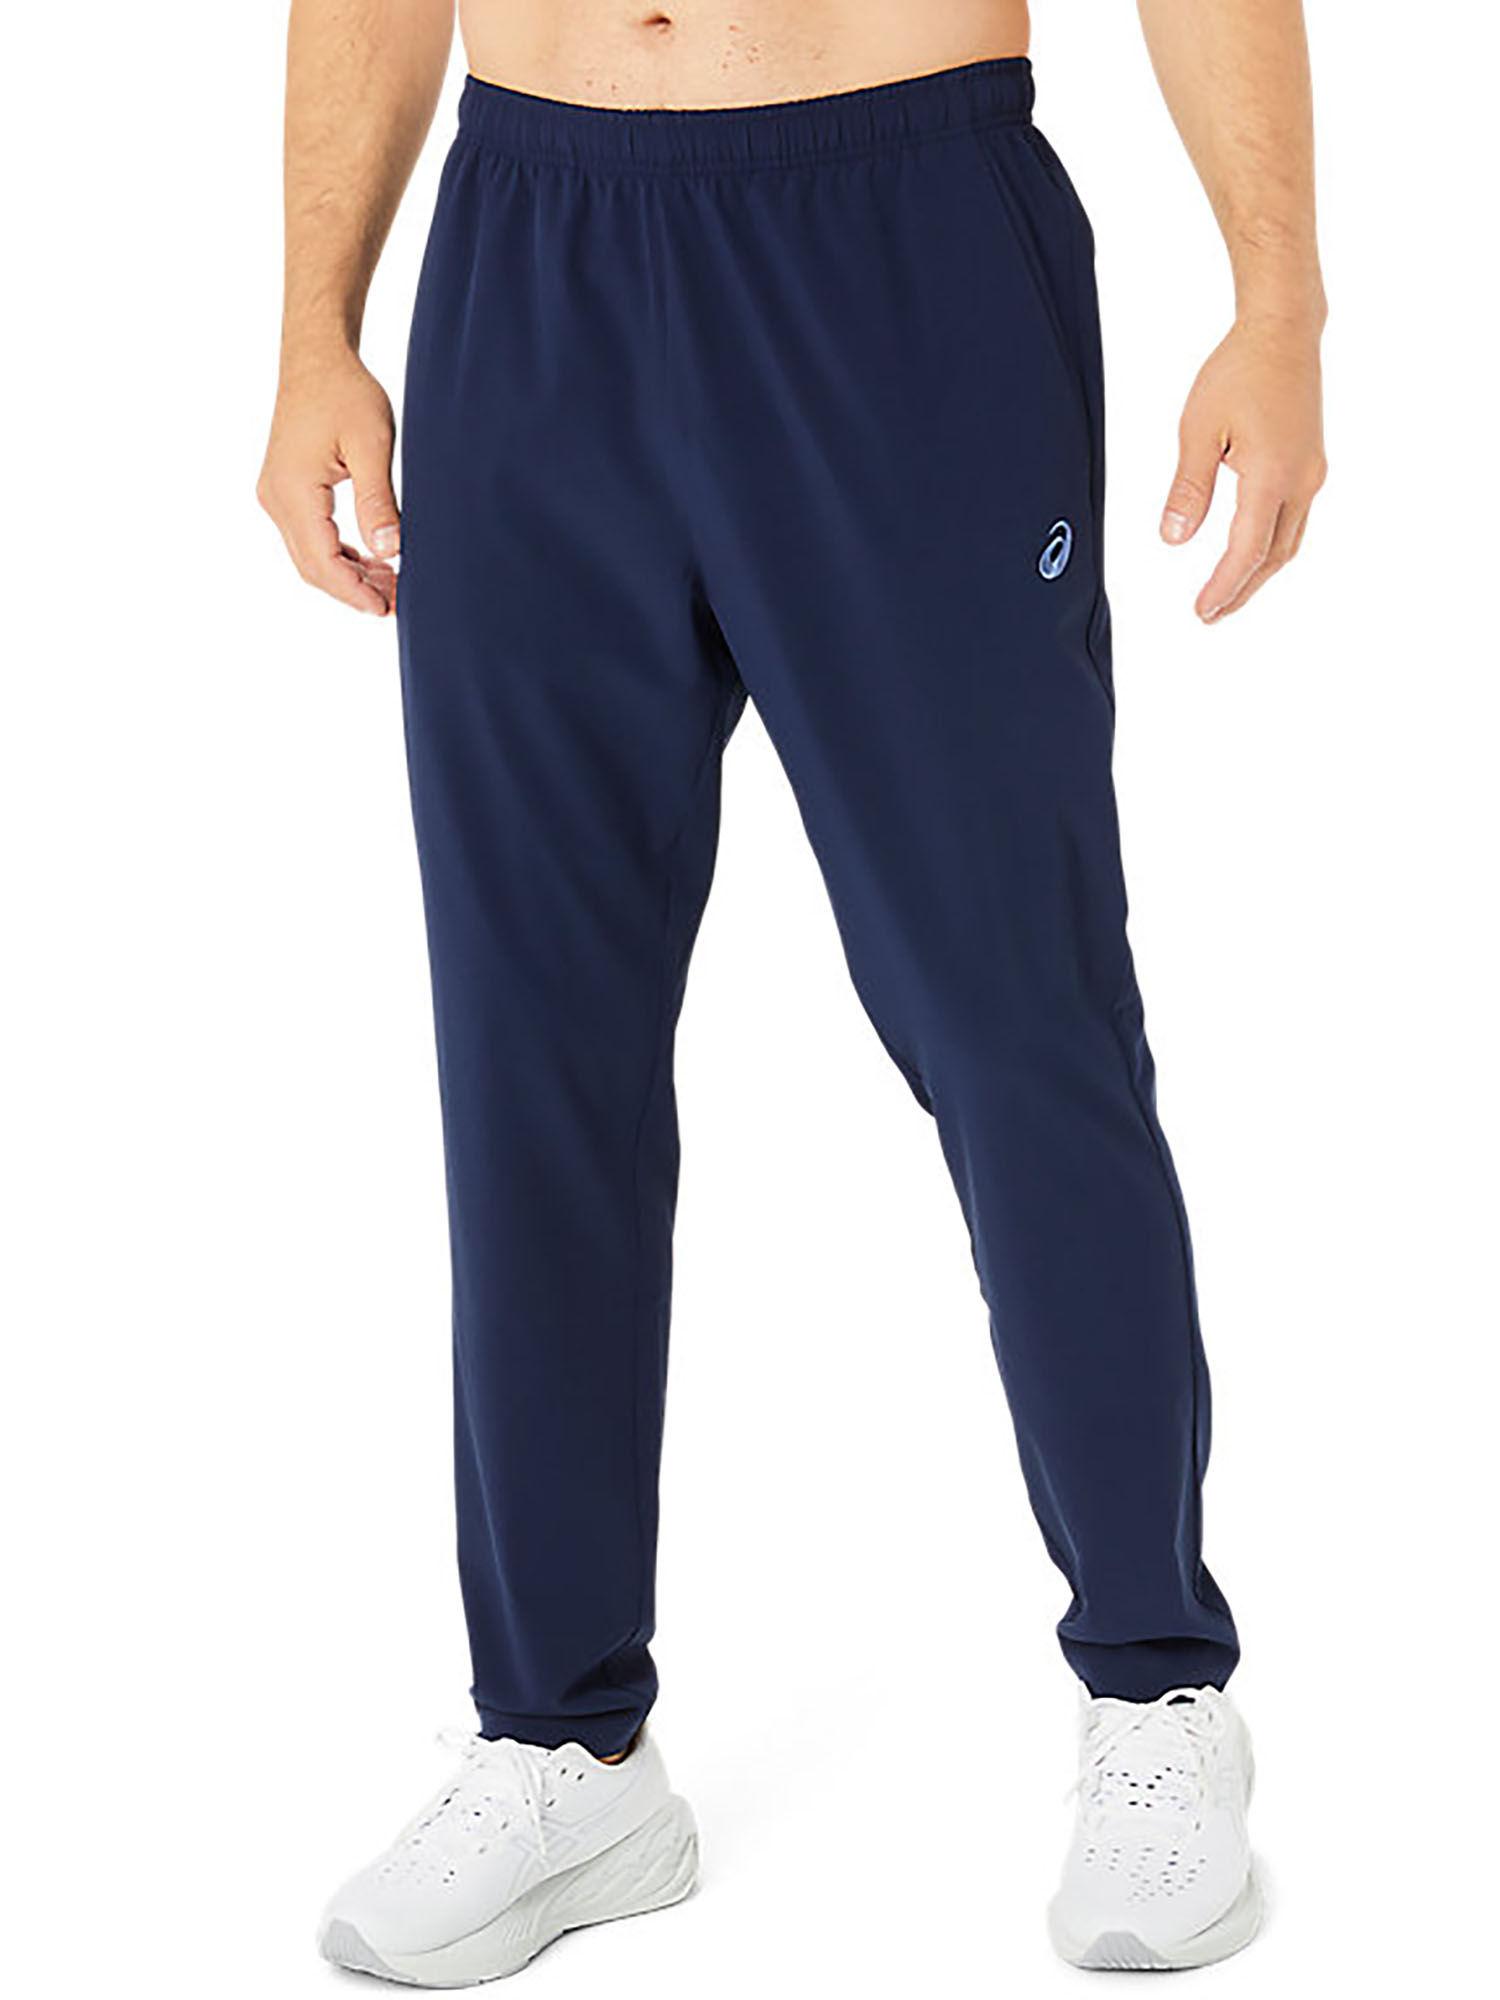 spiral-embroidery-woven-men-blue-sweatpants